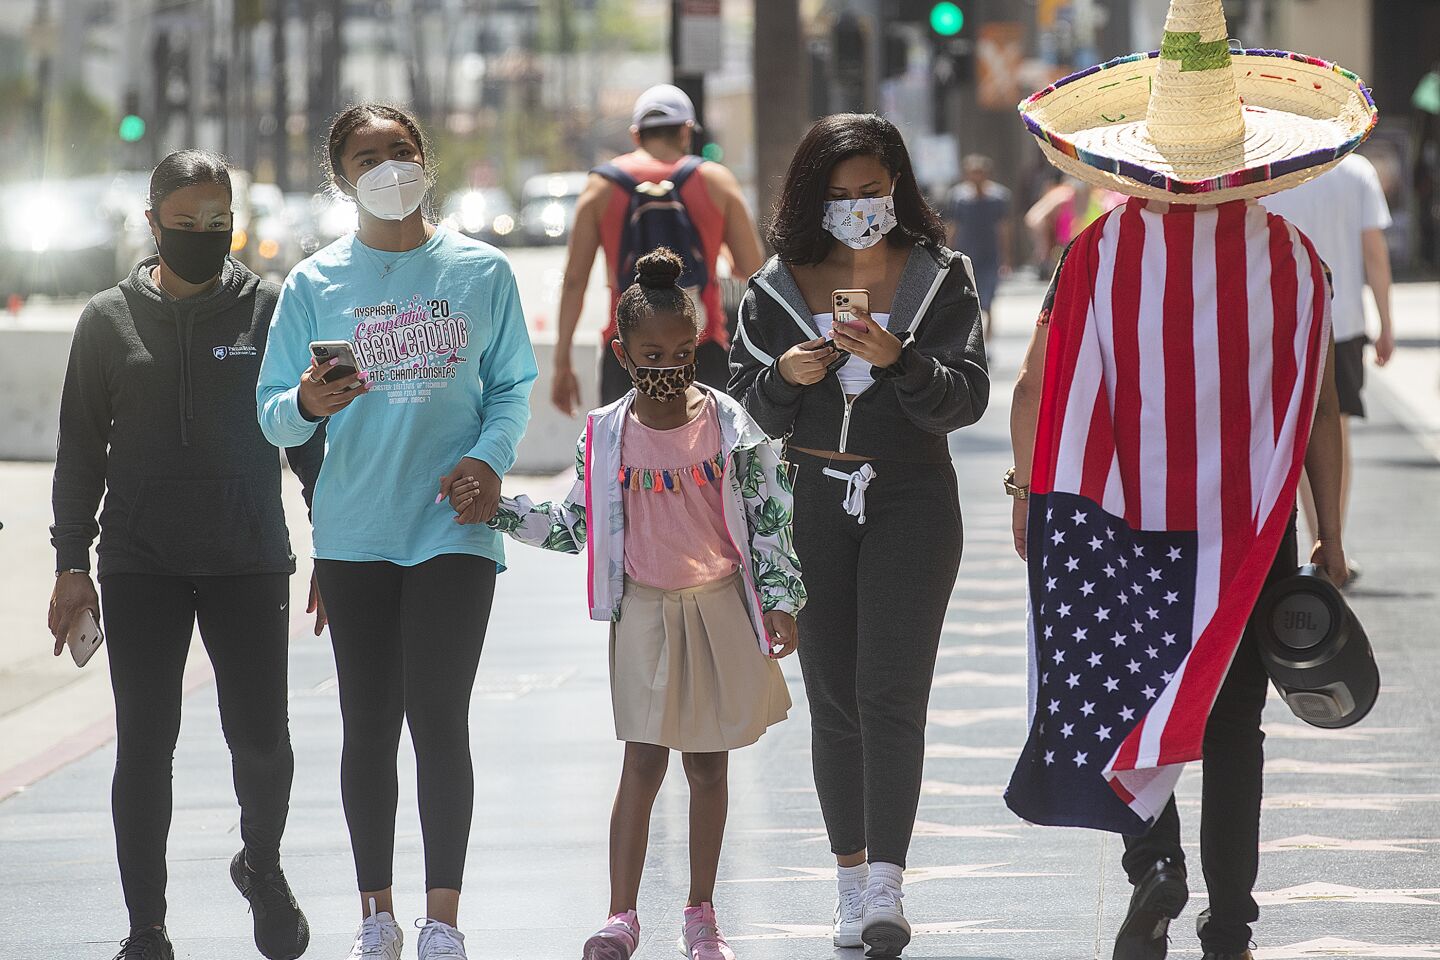 Jair Guido, right, walks with other pedestrians along Hollywood Boulevard in Hollywood.